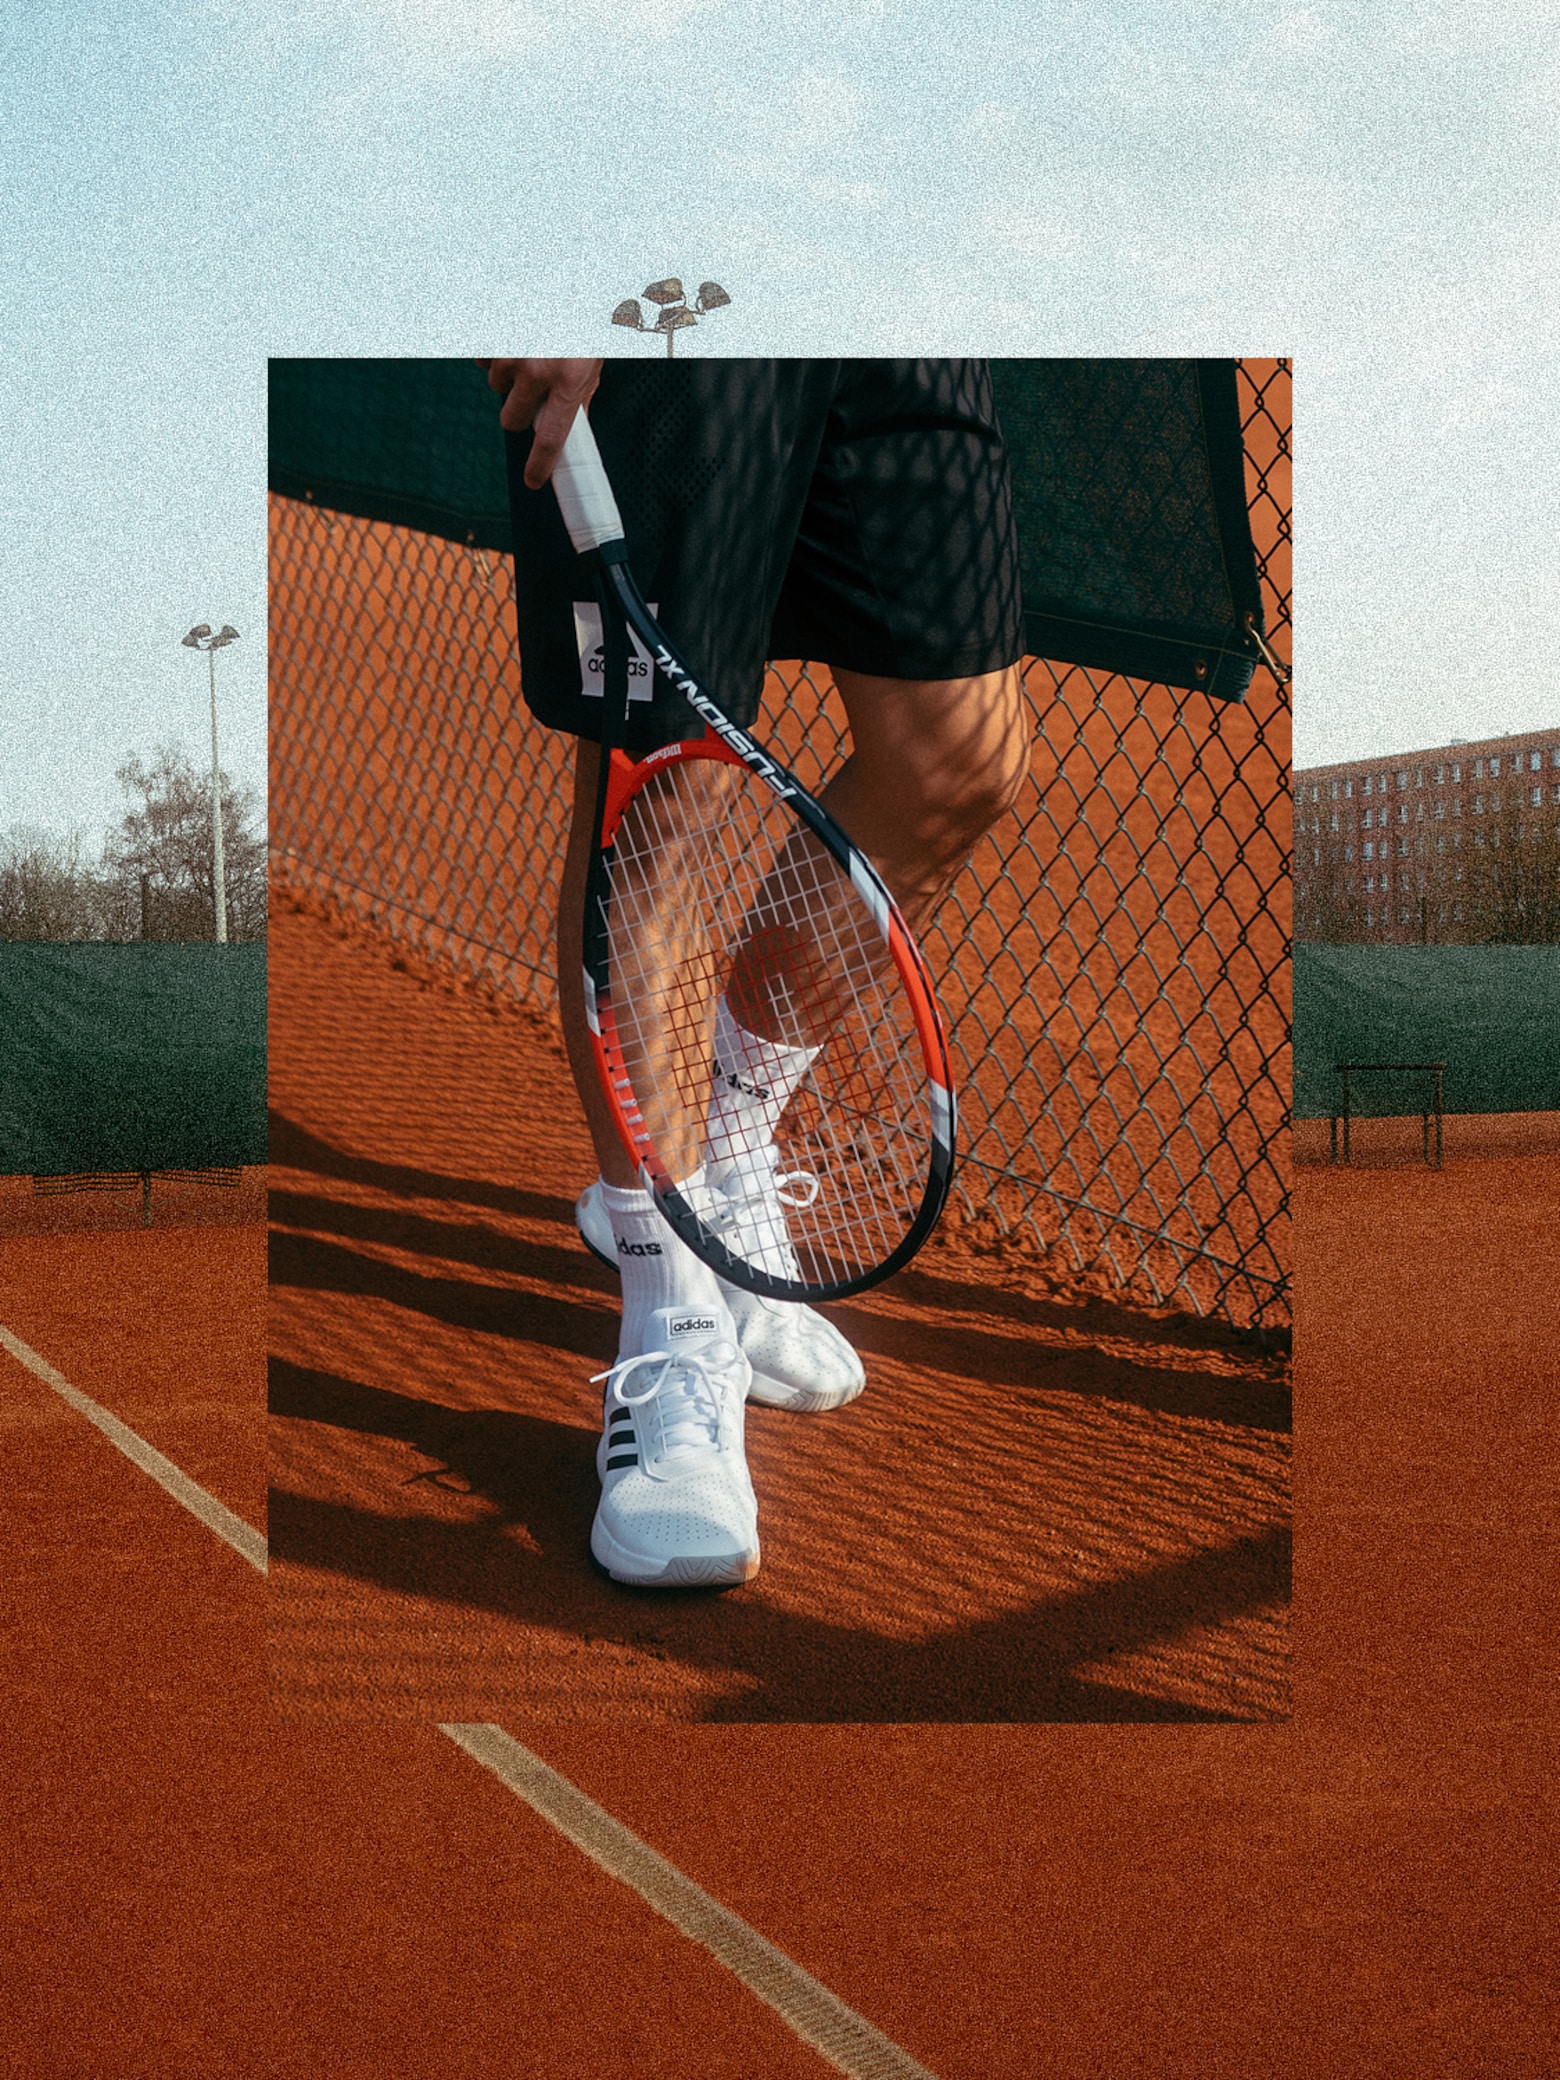 Game, set and match Tennis shoe guide